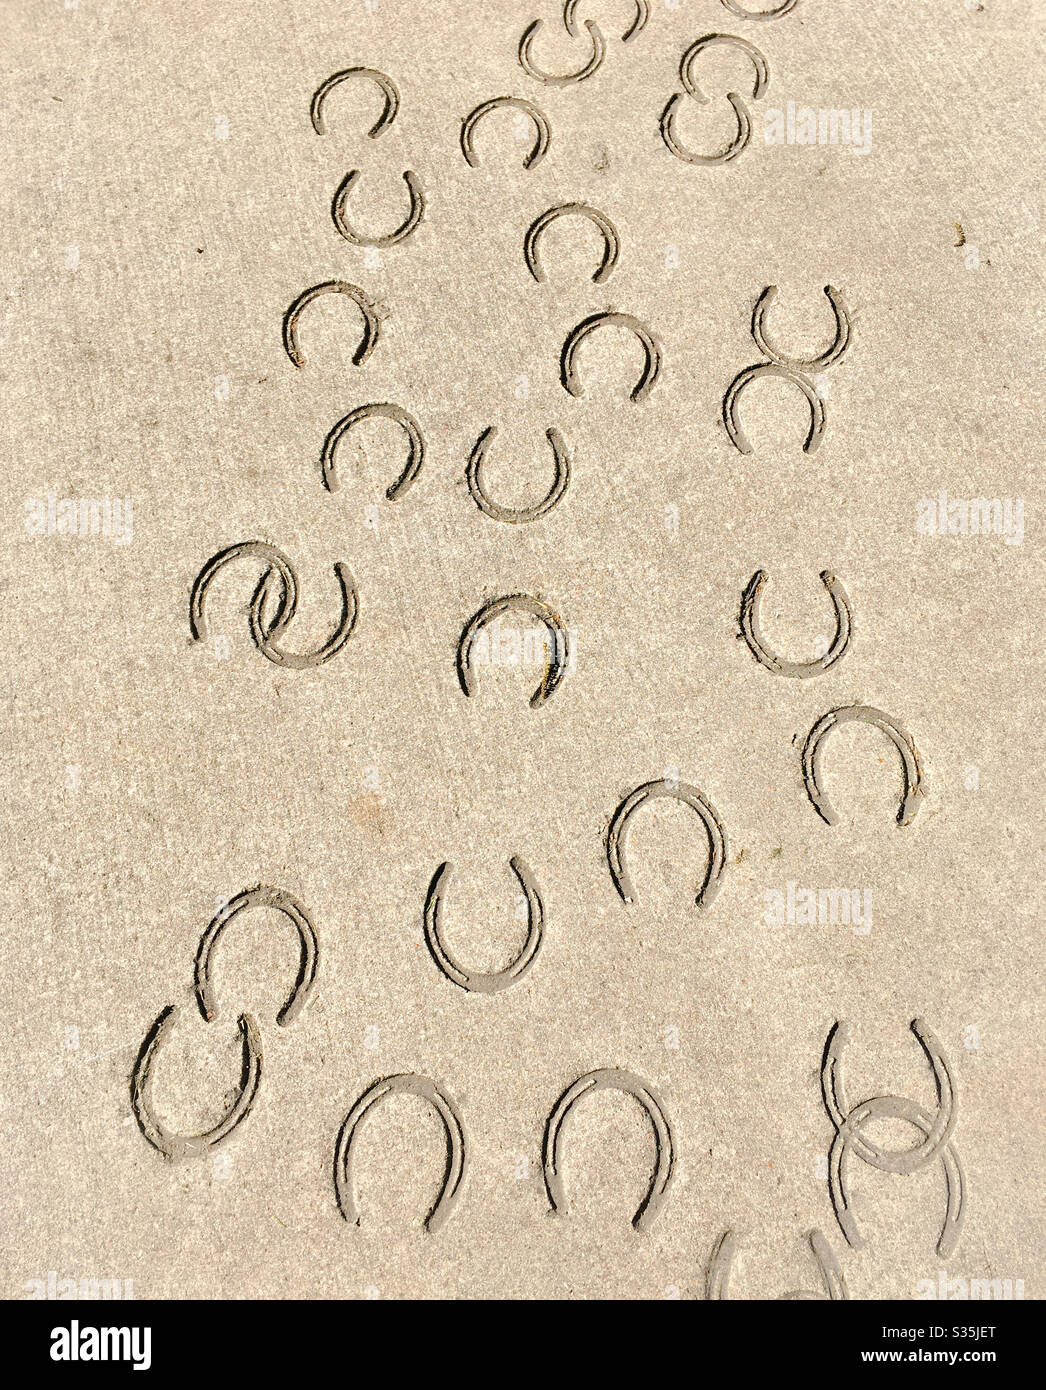 Horse Shoe Prints High Resolution Stock Photography and Images - Alamy